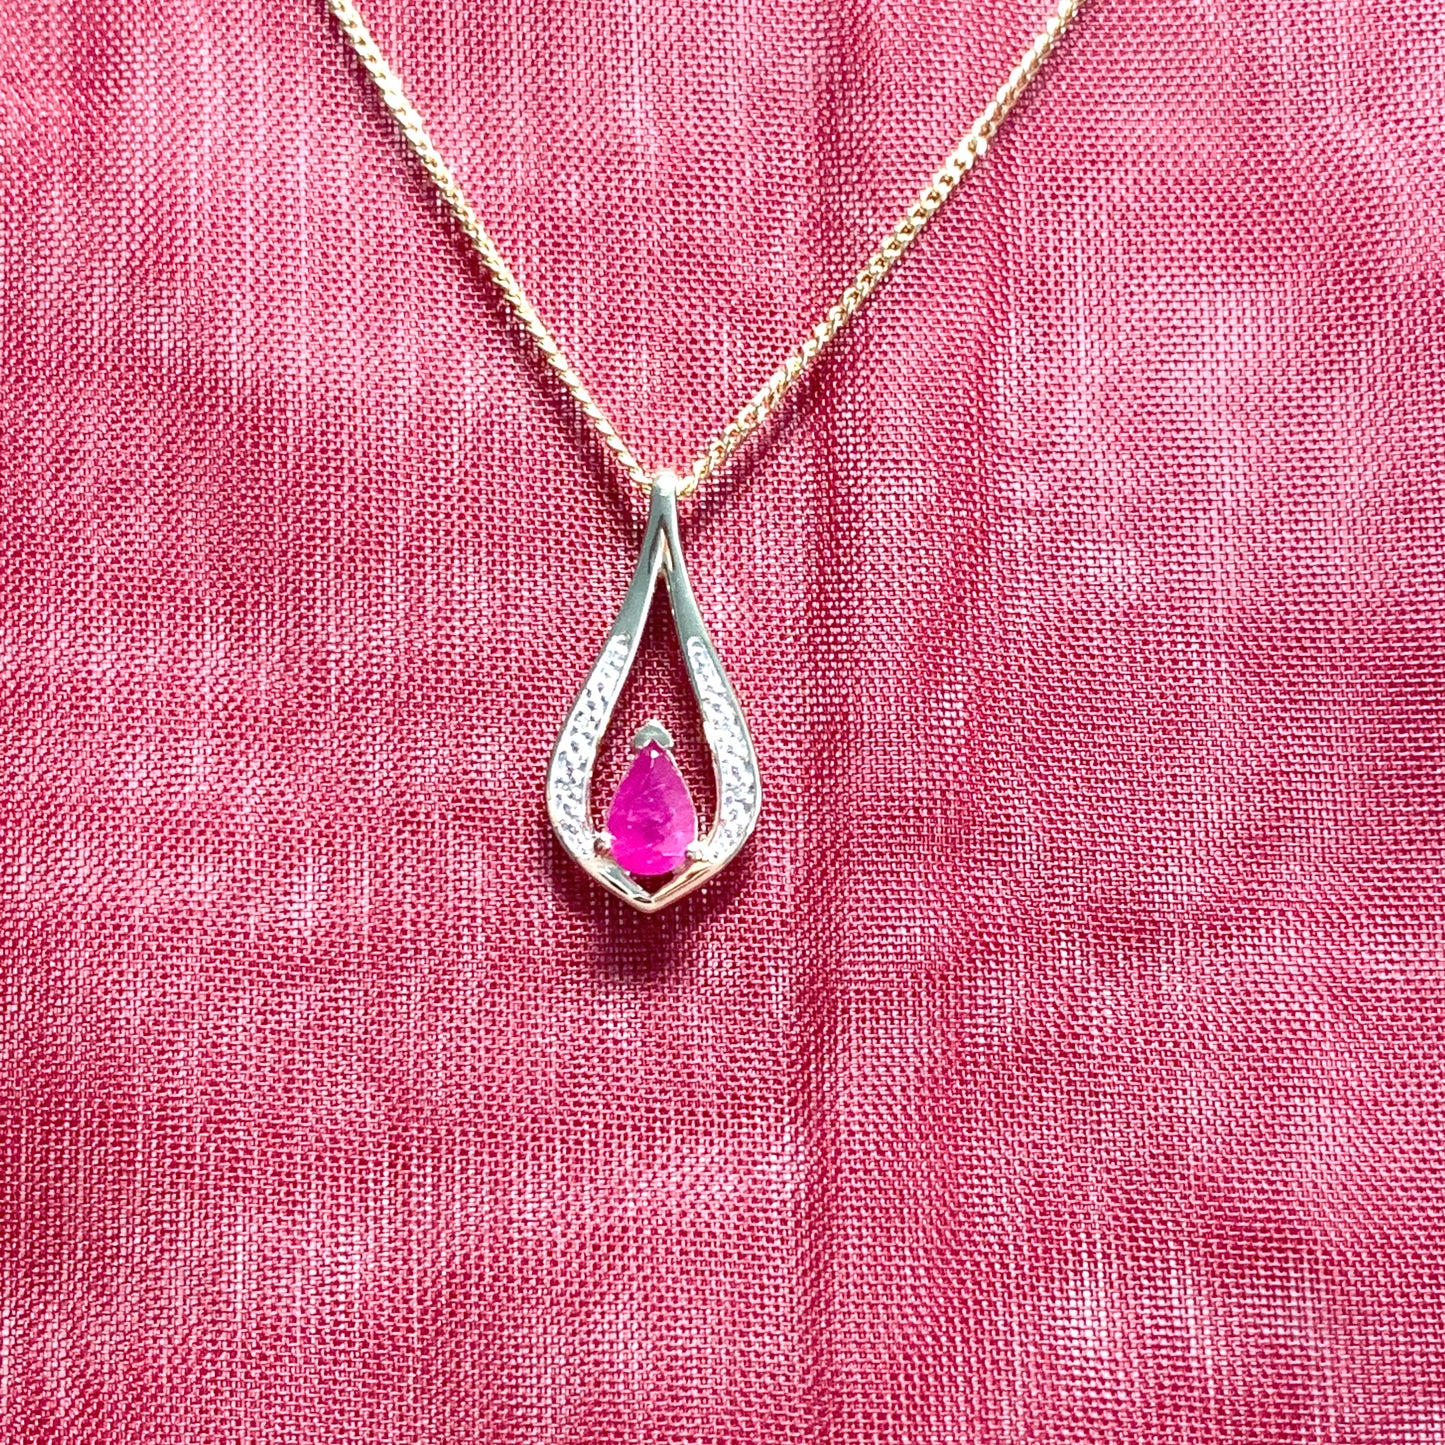 Teardrop red ruby and diamond necklace yellow gold